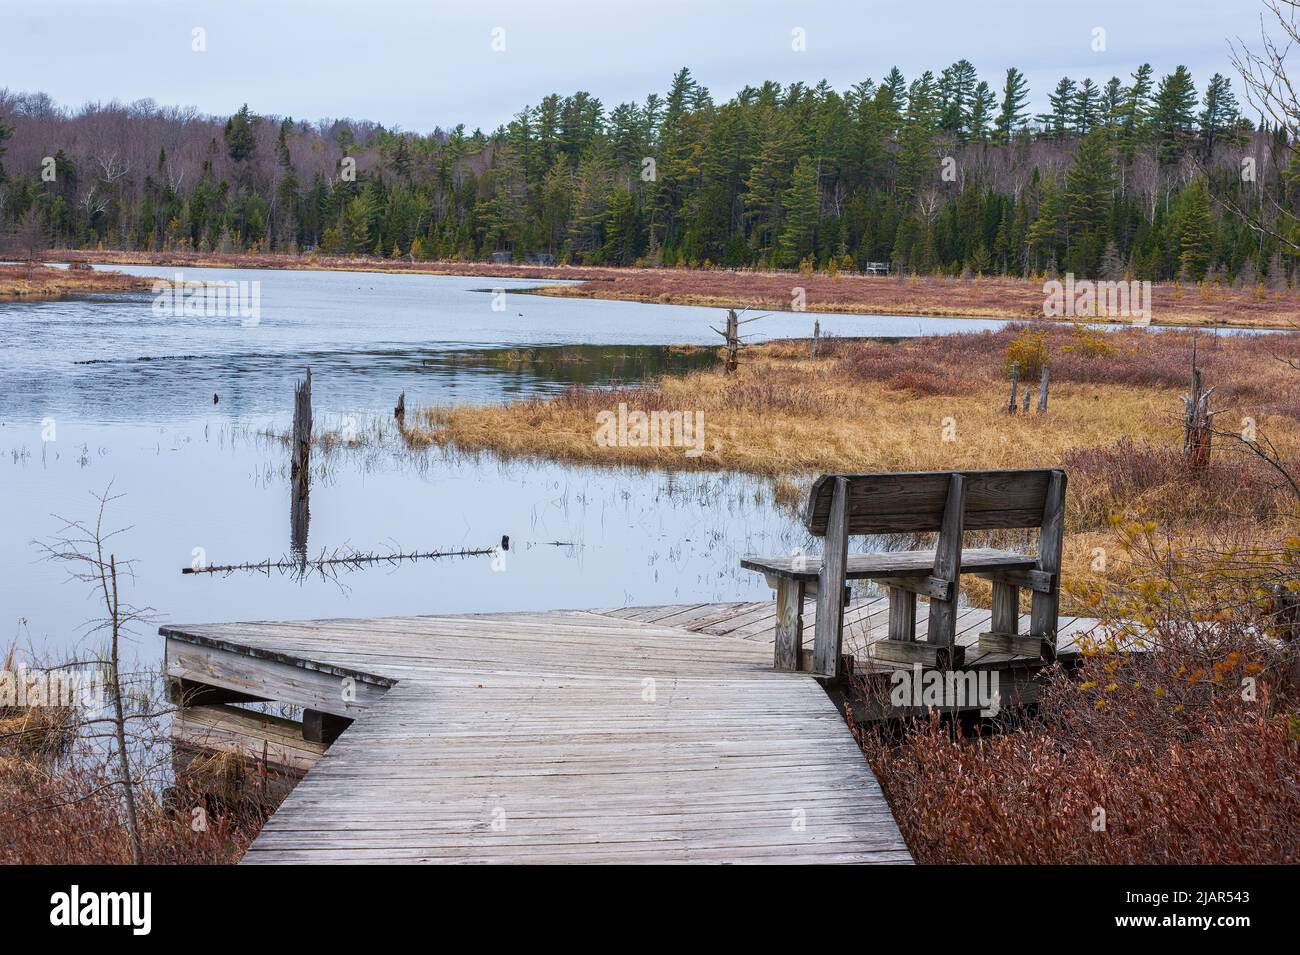 Heron Marsh. Freshwater wetlands in Adirondack Mountains. Bench on an observation platform. Paul Smith's College Visitor Interpretive Center, New York Stock Photo